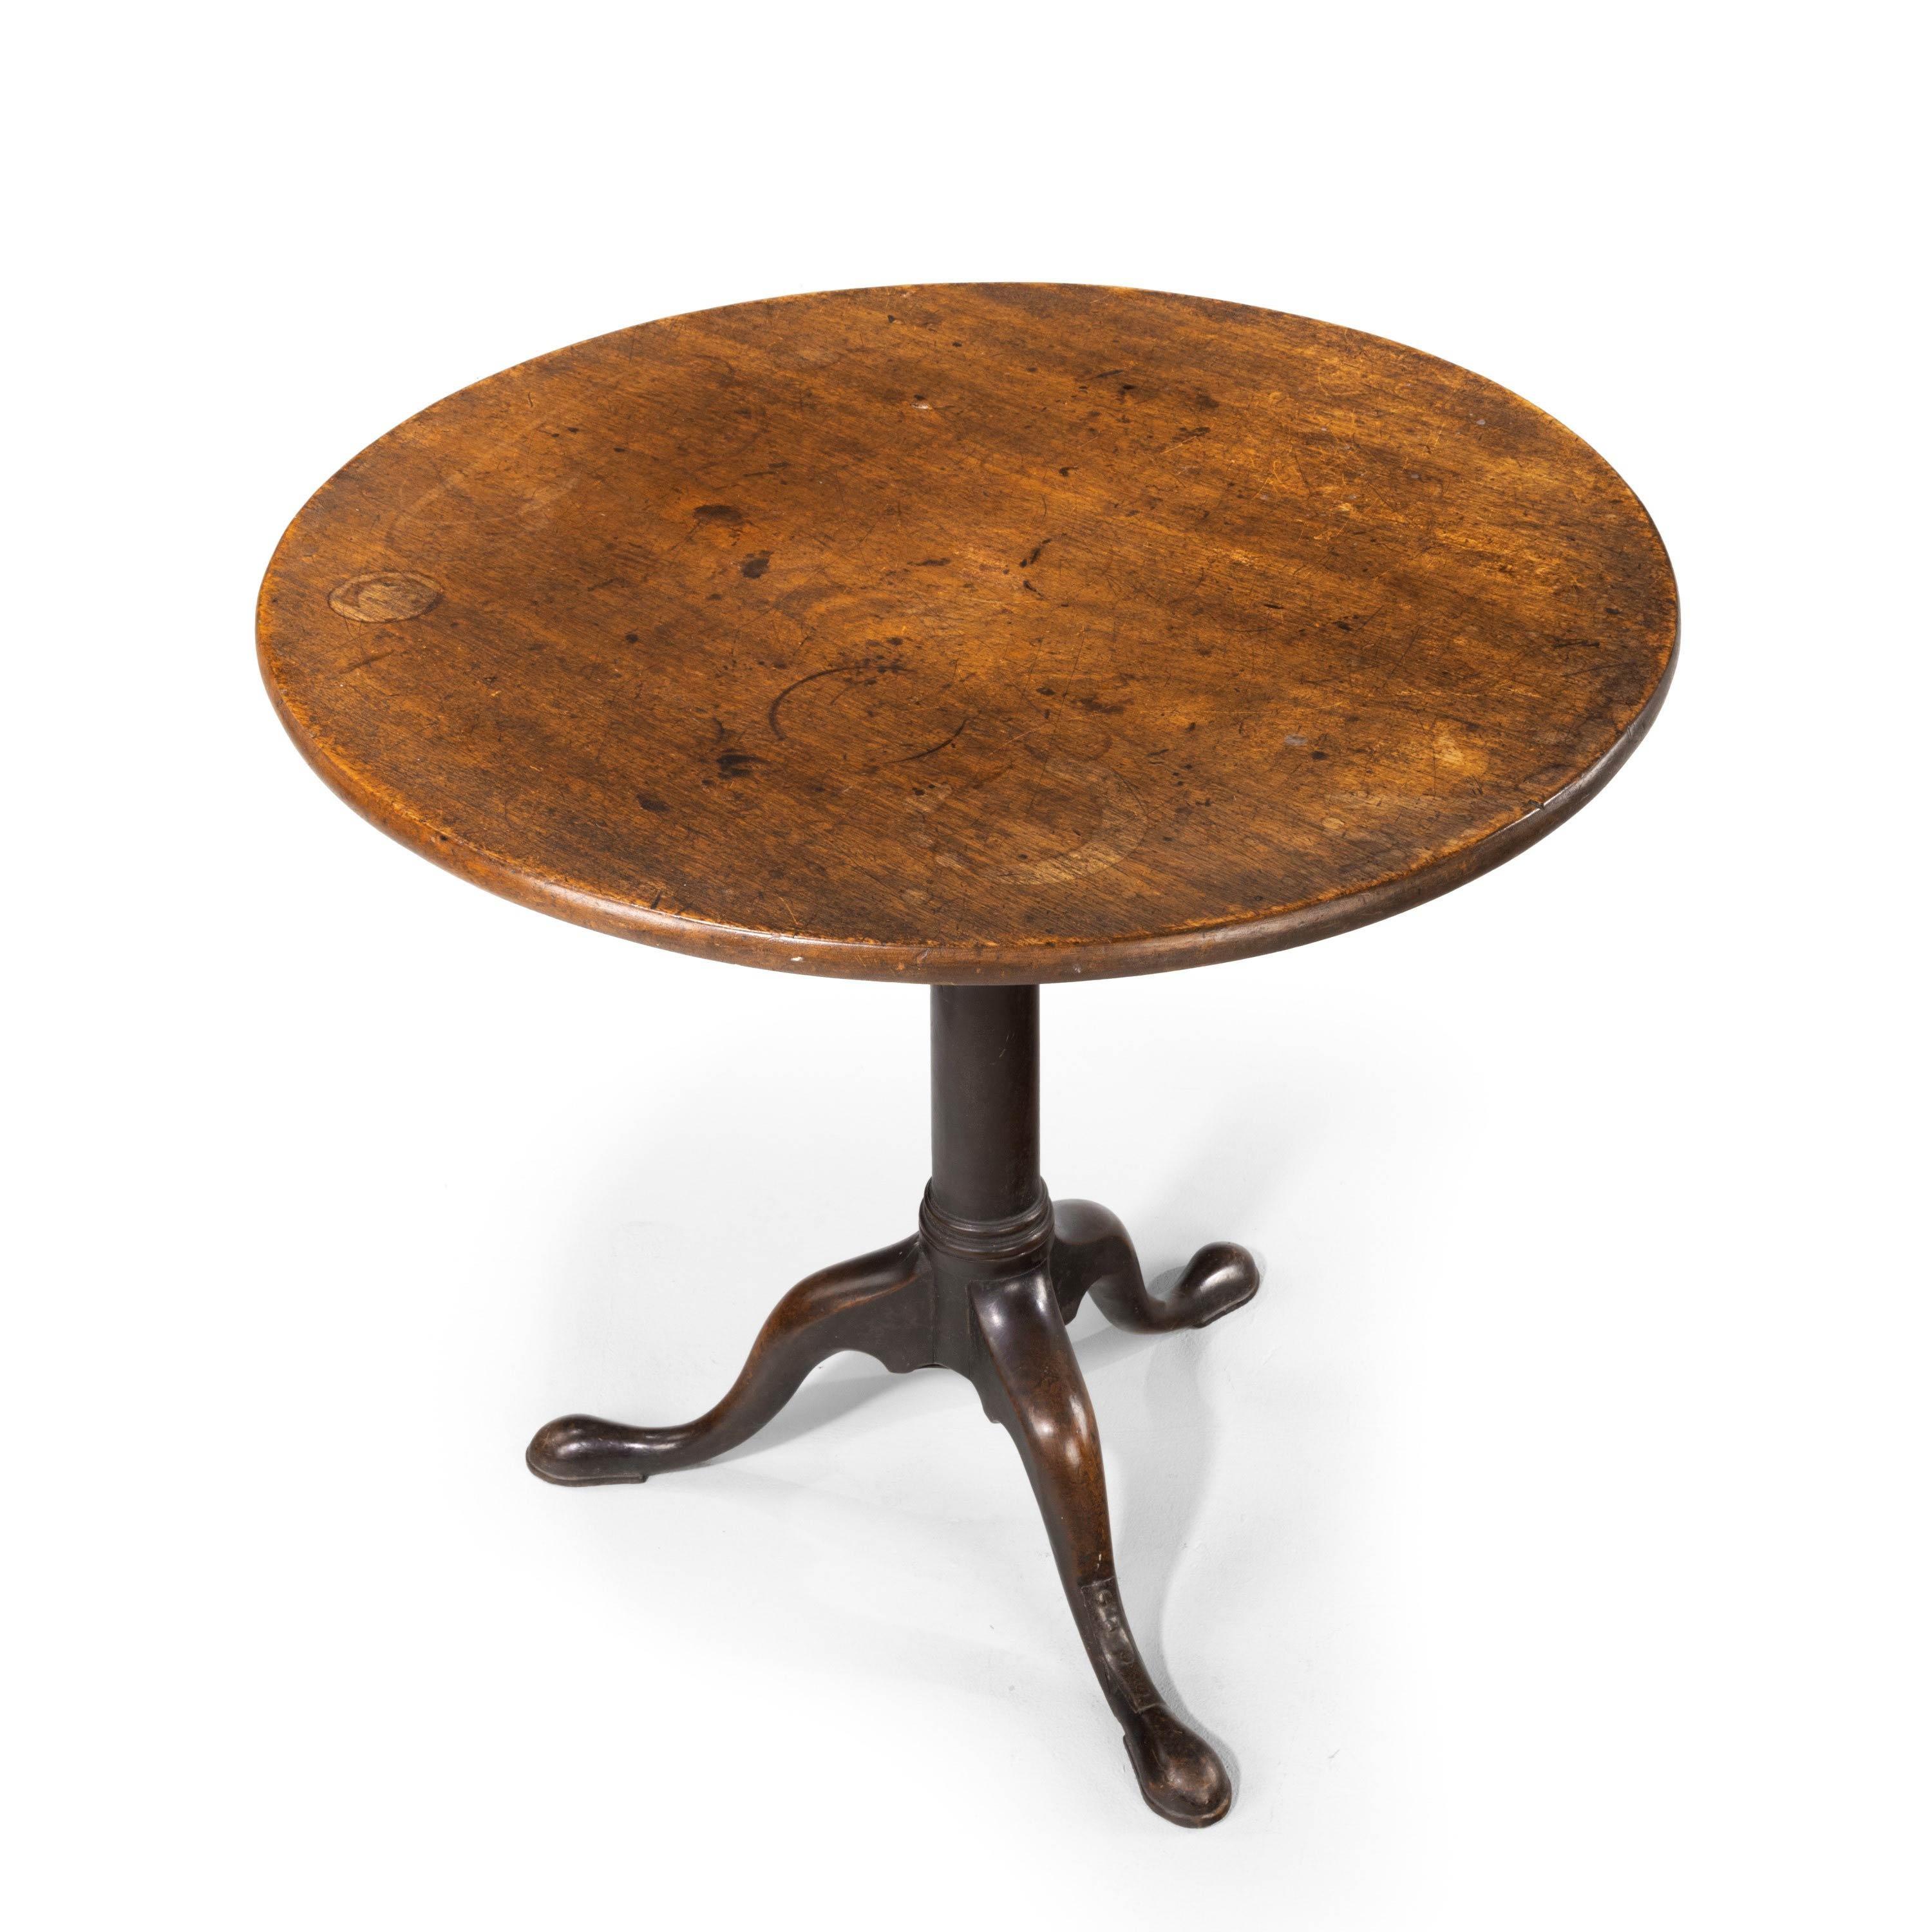 Attractive George III Period Mahogany Tilt Topped Table 1